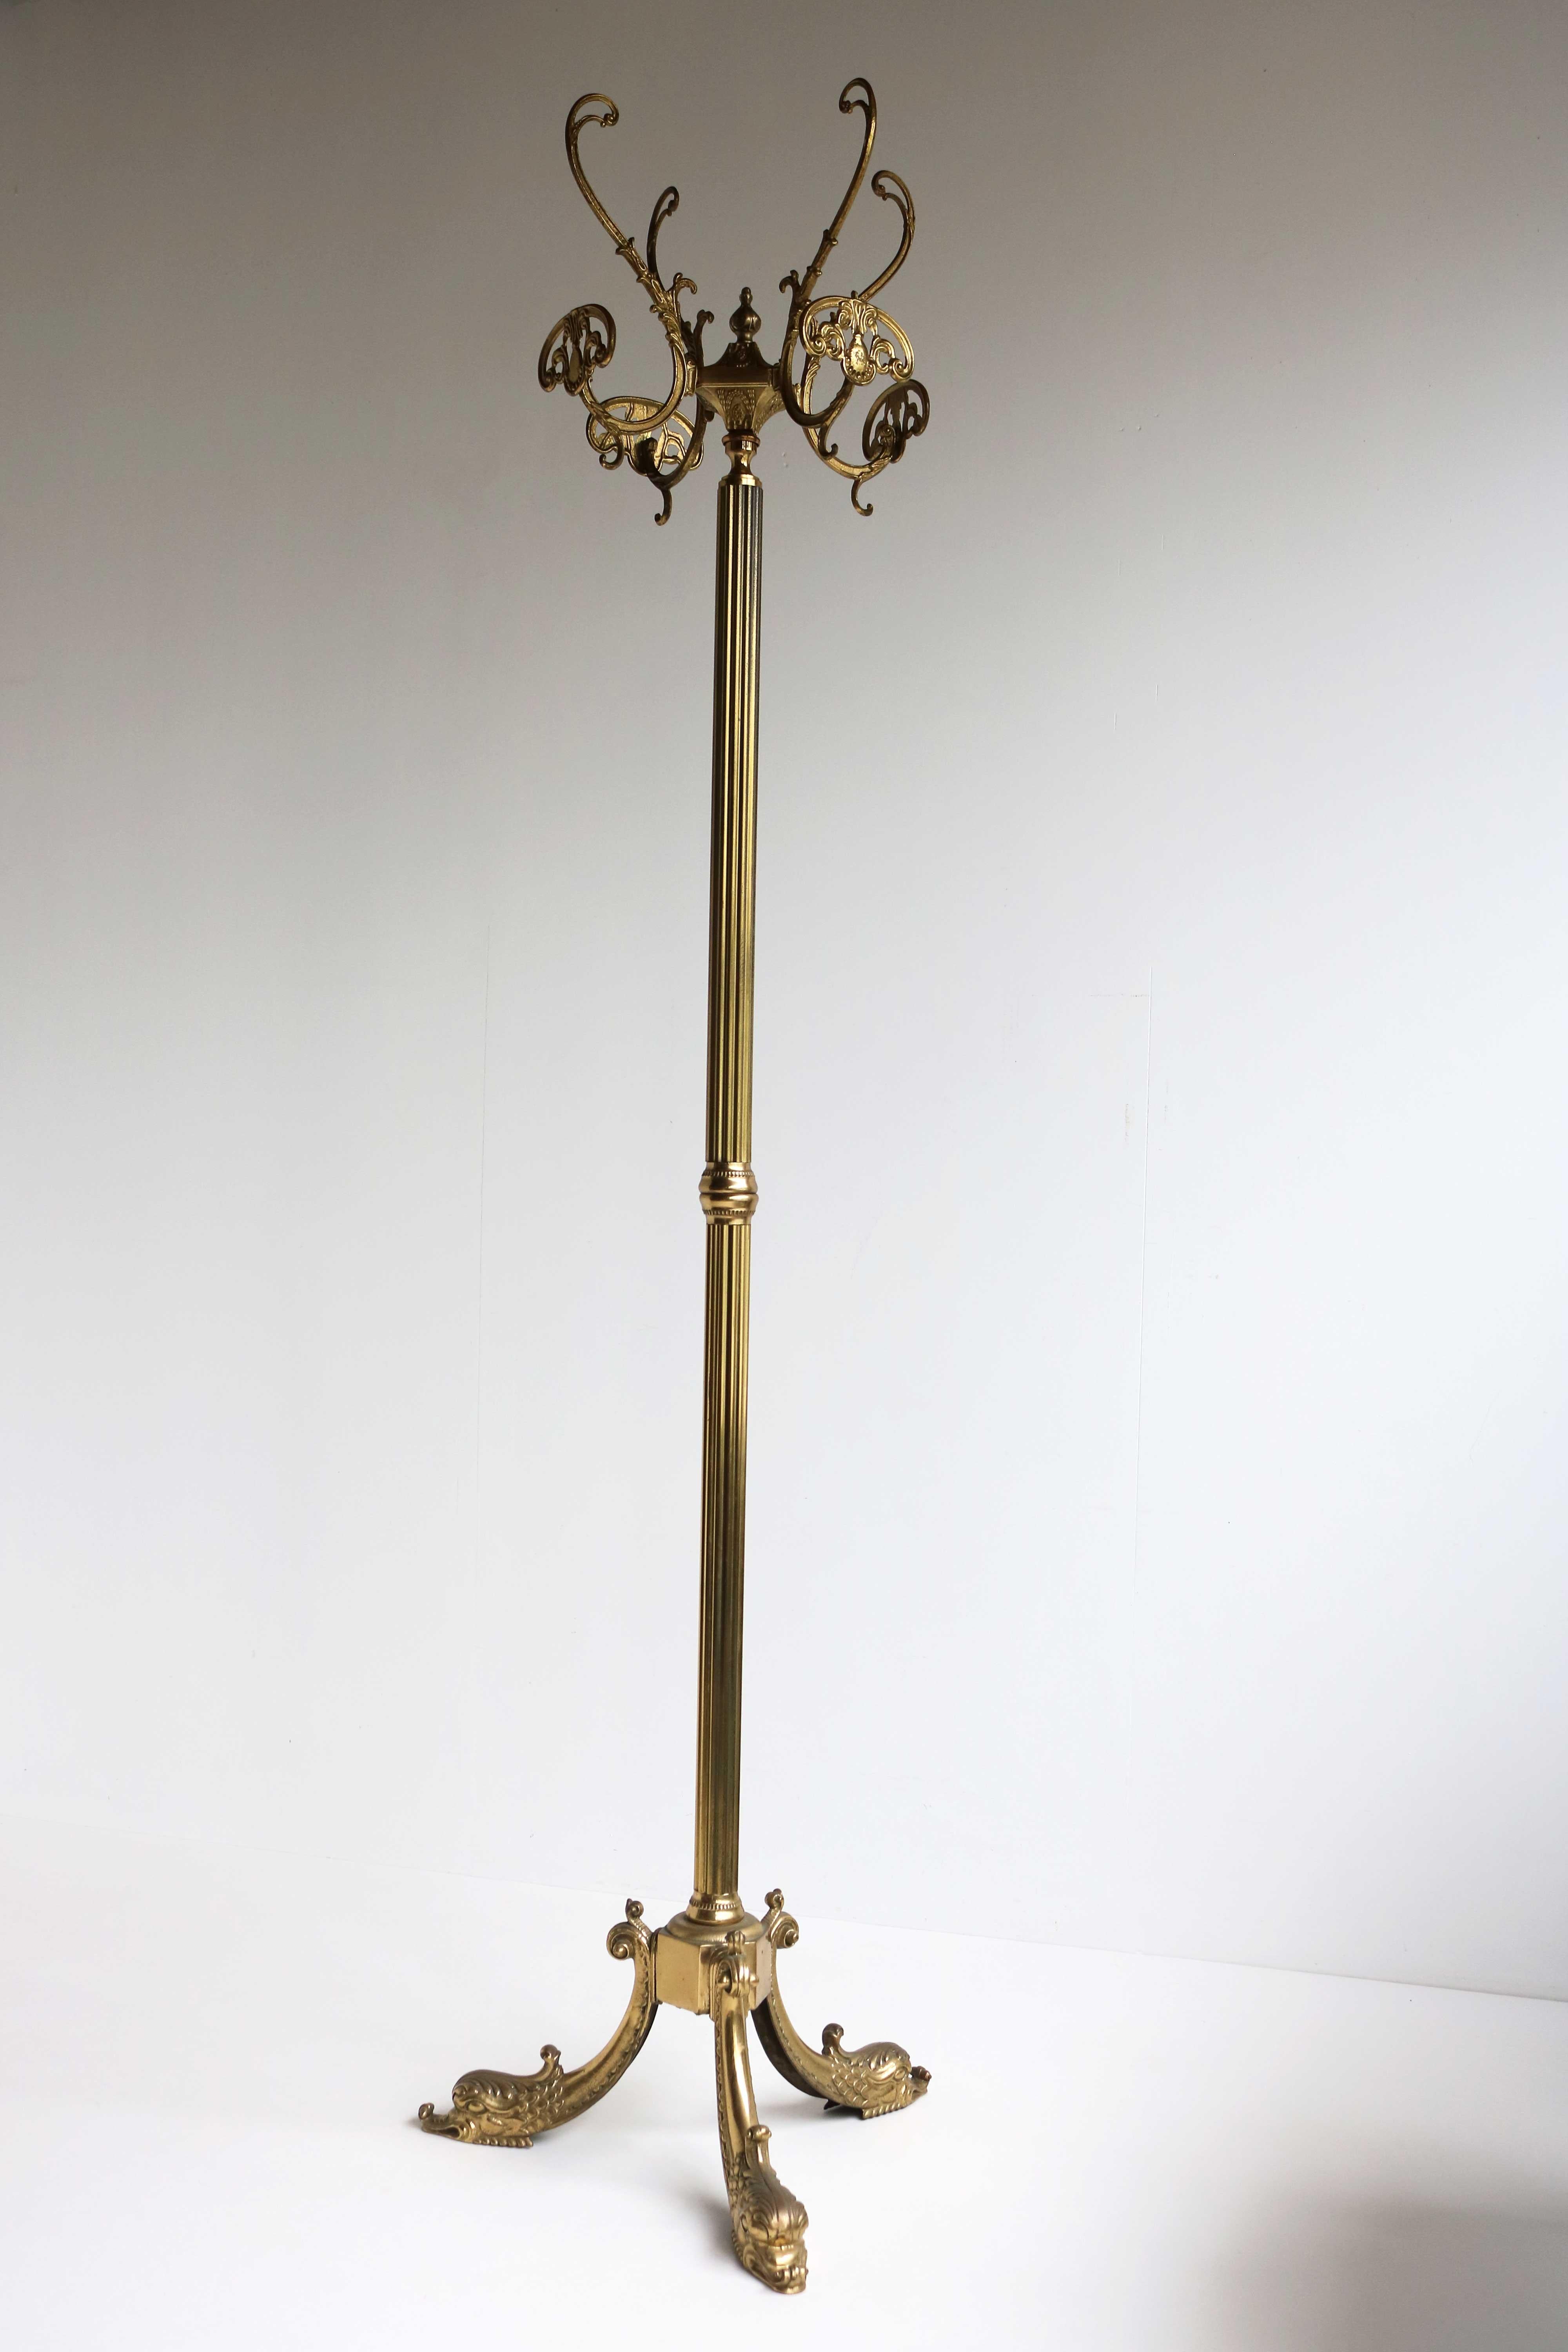 1960s Italian midcentury Hollywood Regency Style Neoclassical brass floor coat hanger swivel four-hook hall tree stand dolphin standing coat hat rack.

This beautiful vintage ornate hall tree dates to the 1960s, It is crafted from brass and has